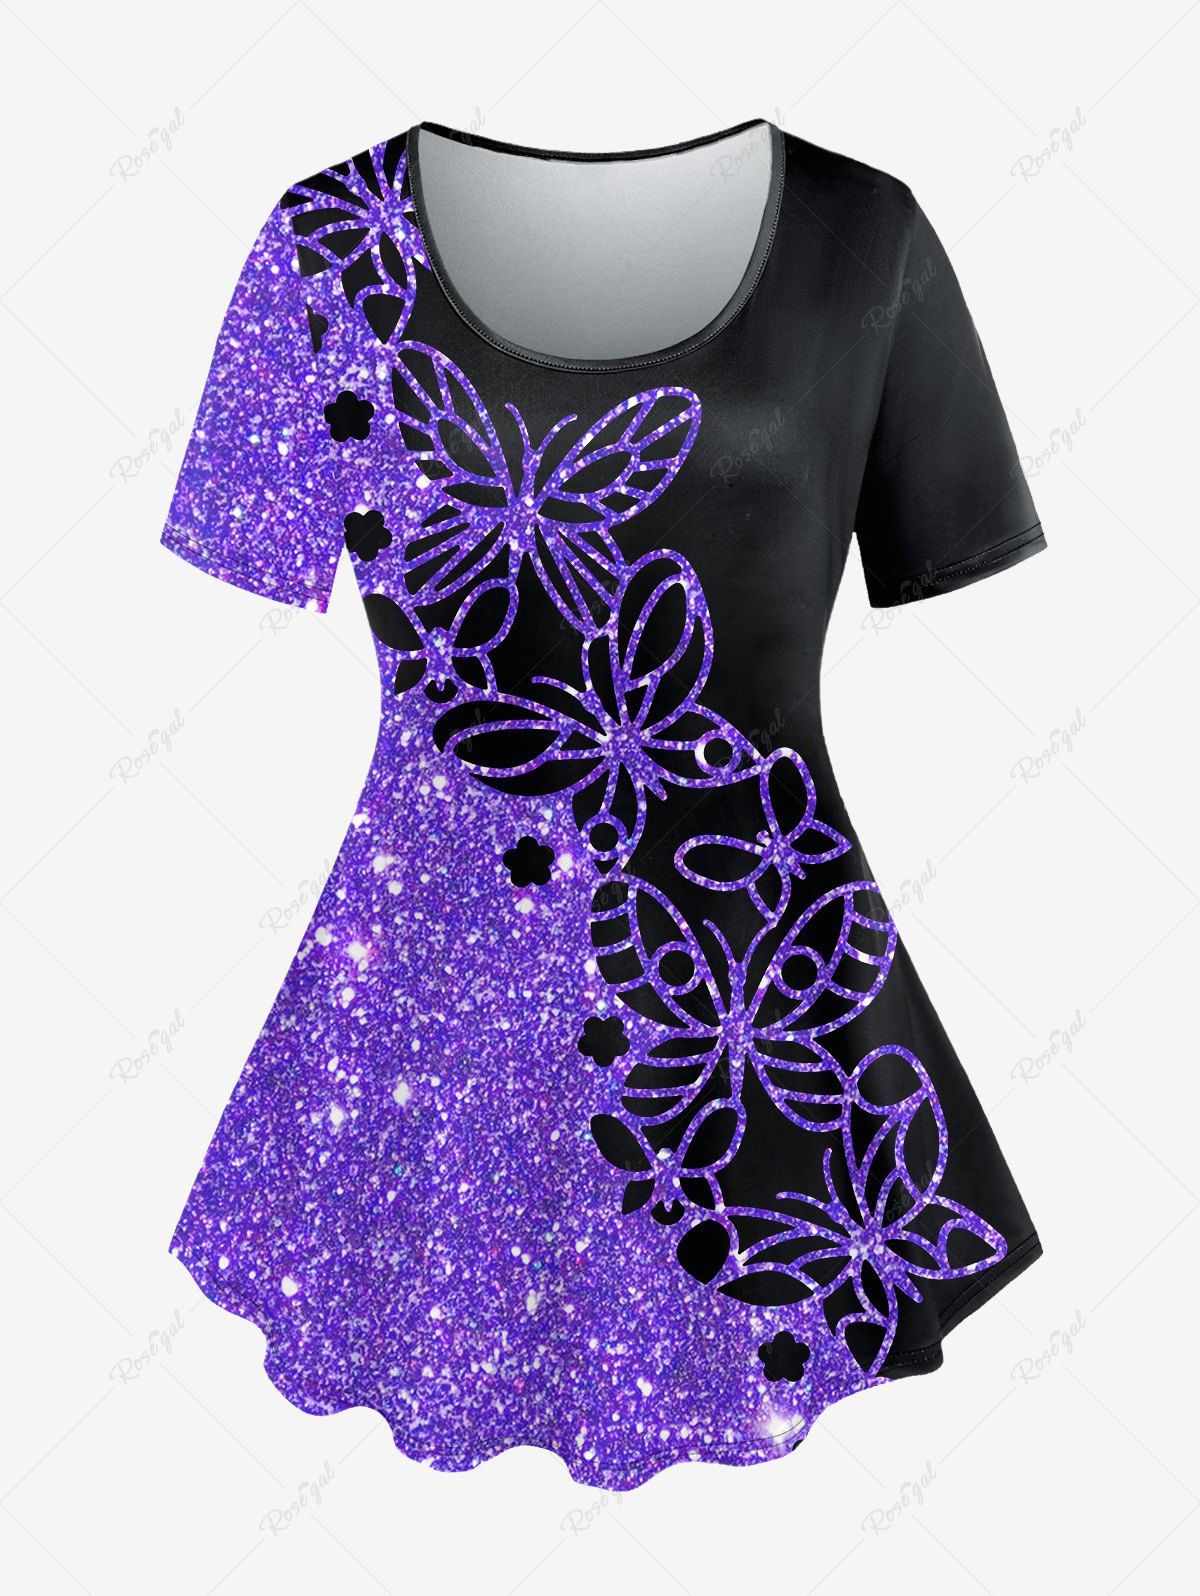 Chic Plus Size Colorblock Butterfly Sparkling Sequin Print Short Sleeves T-shirt  